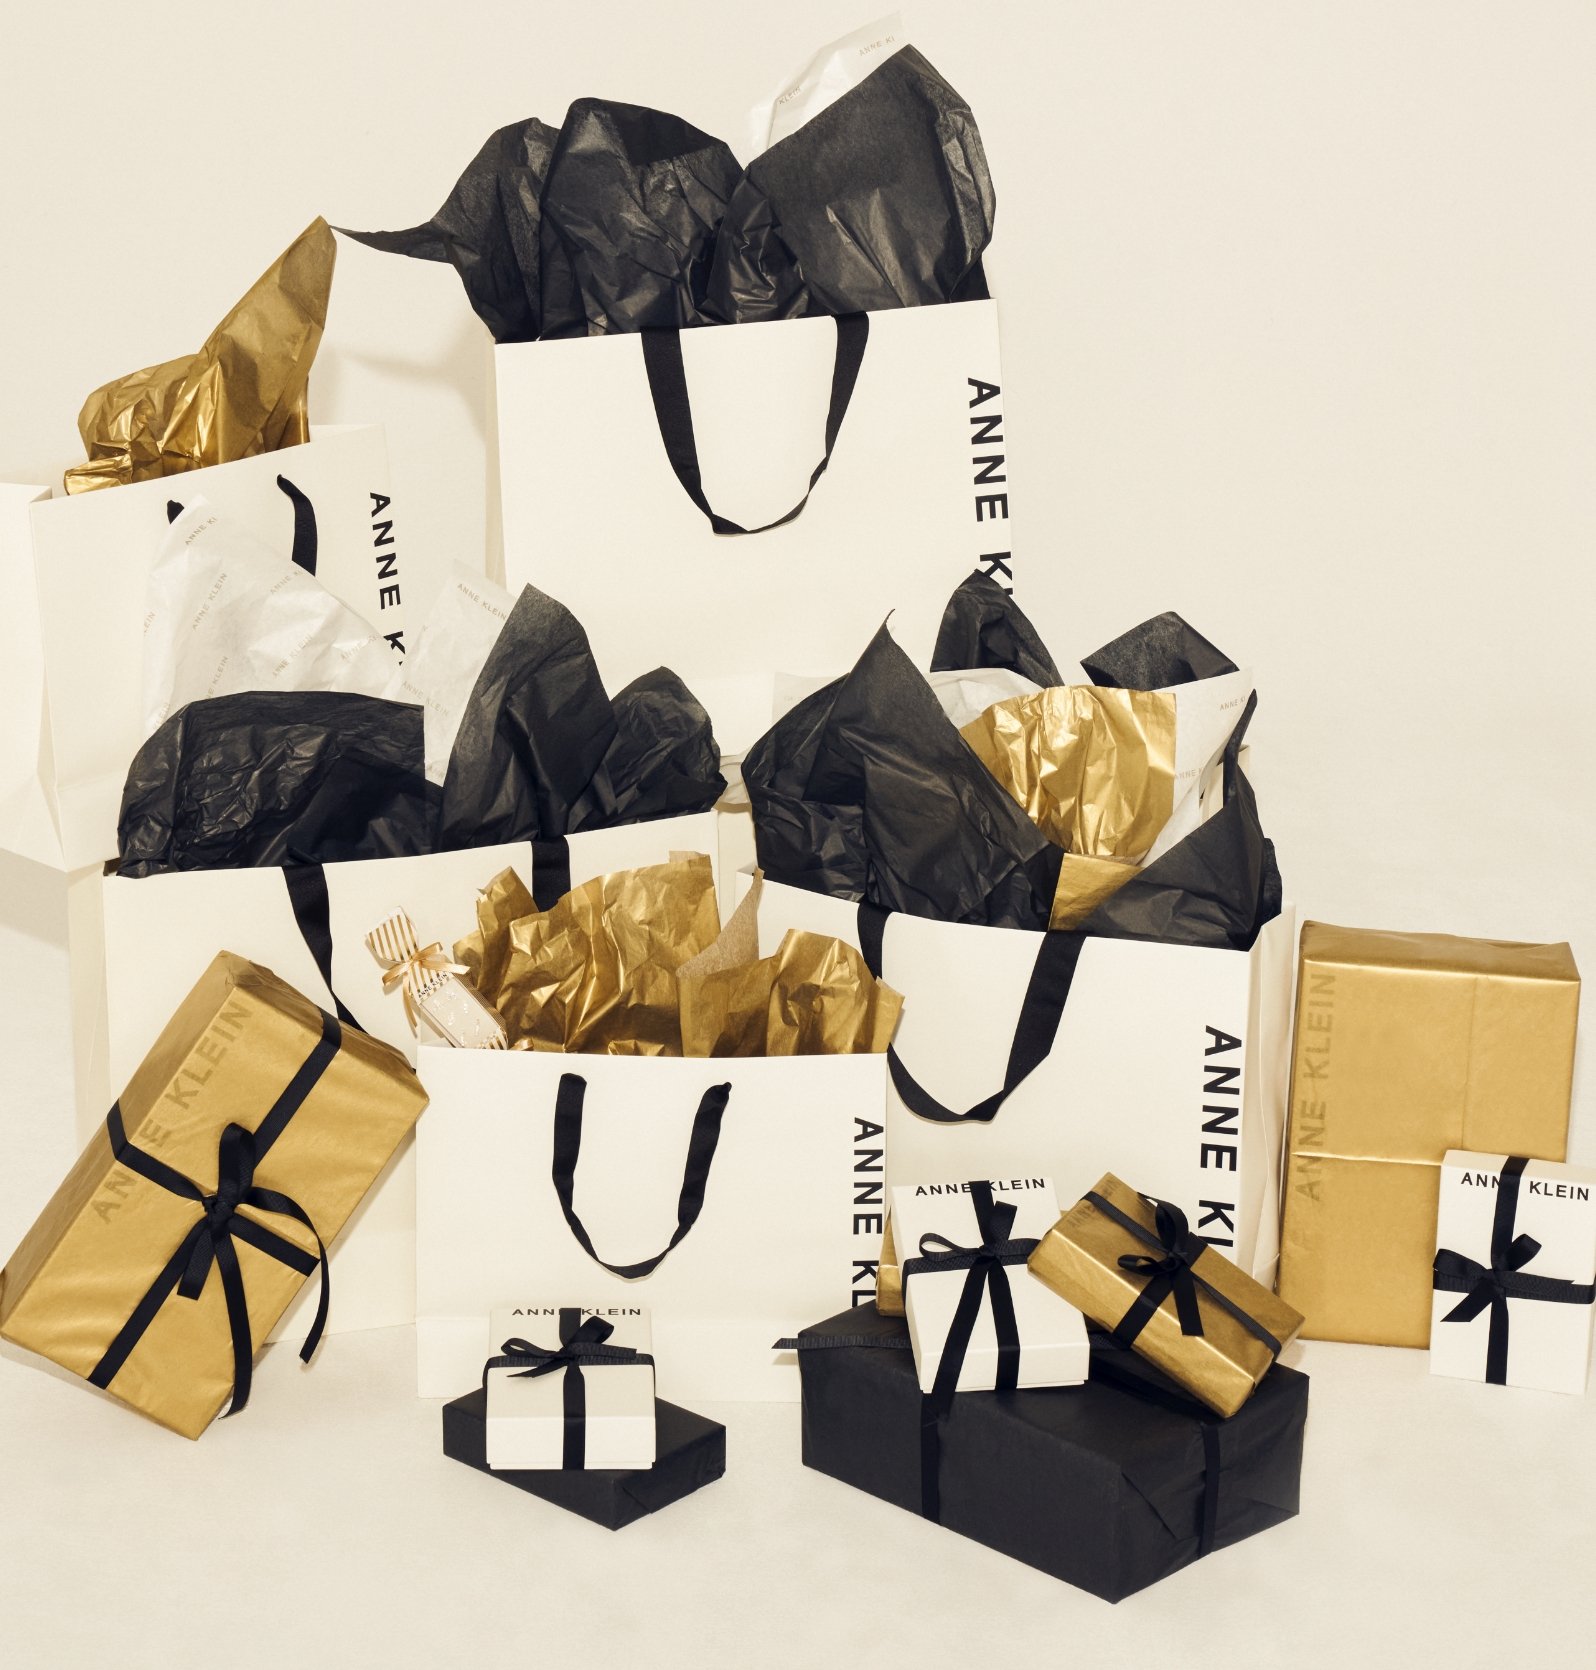 Anne Klein shopping bags and gift boxes